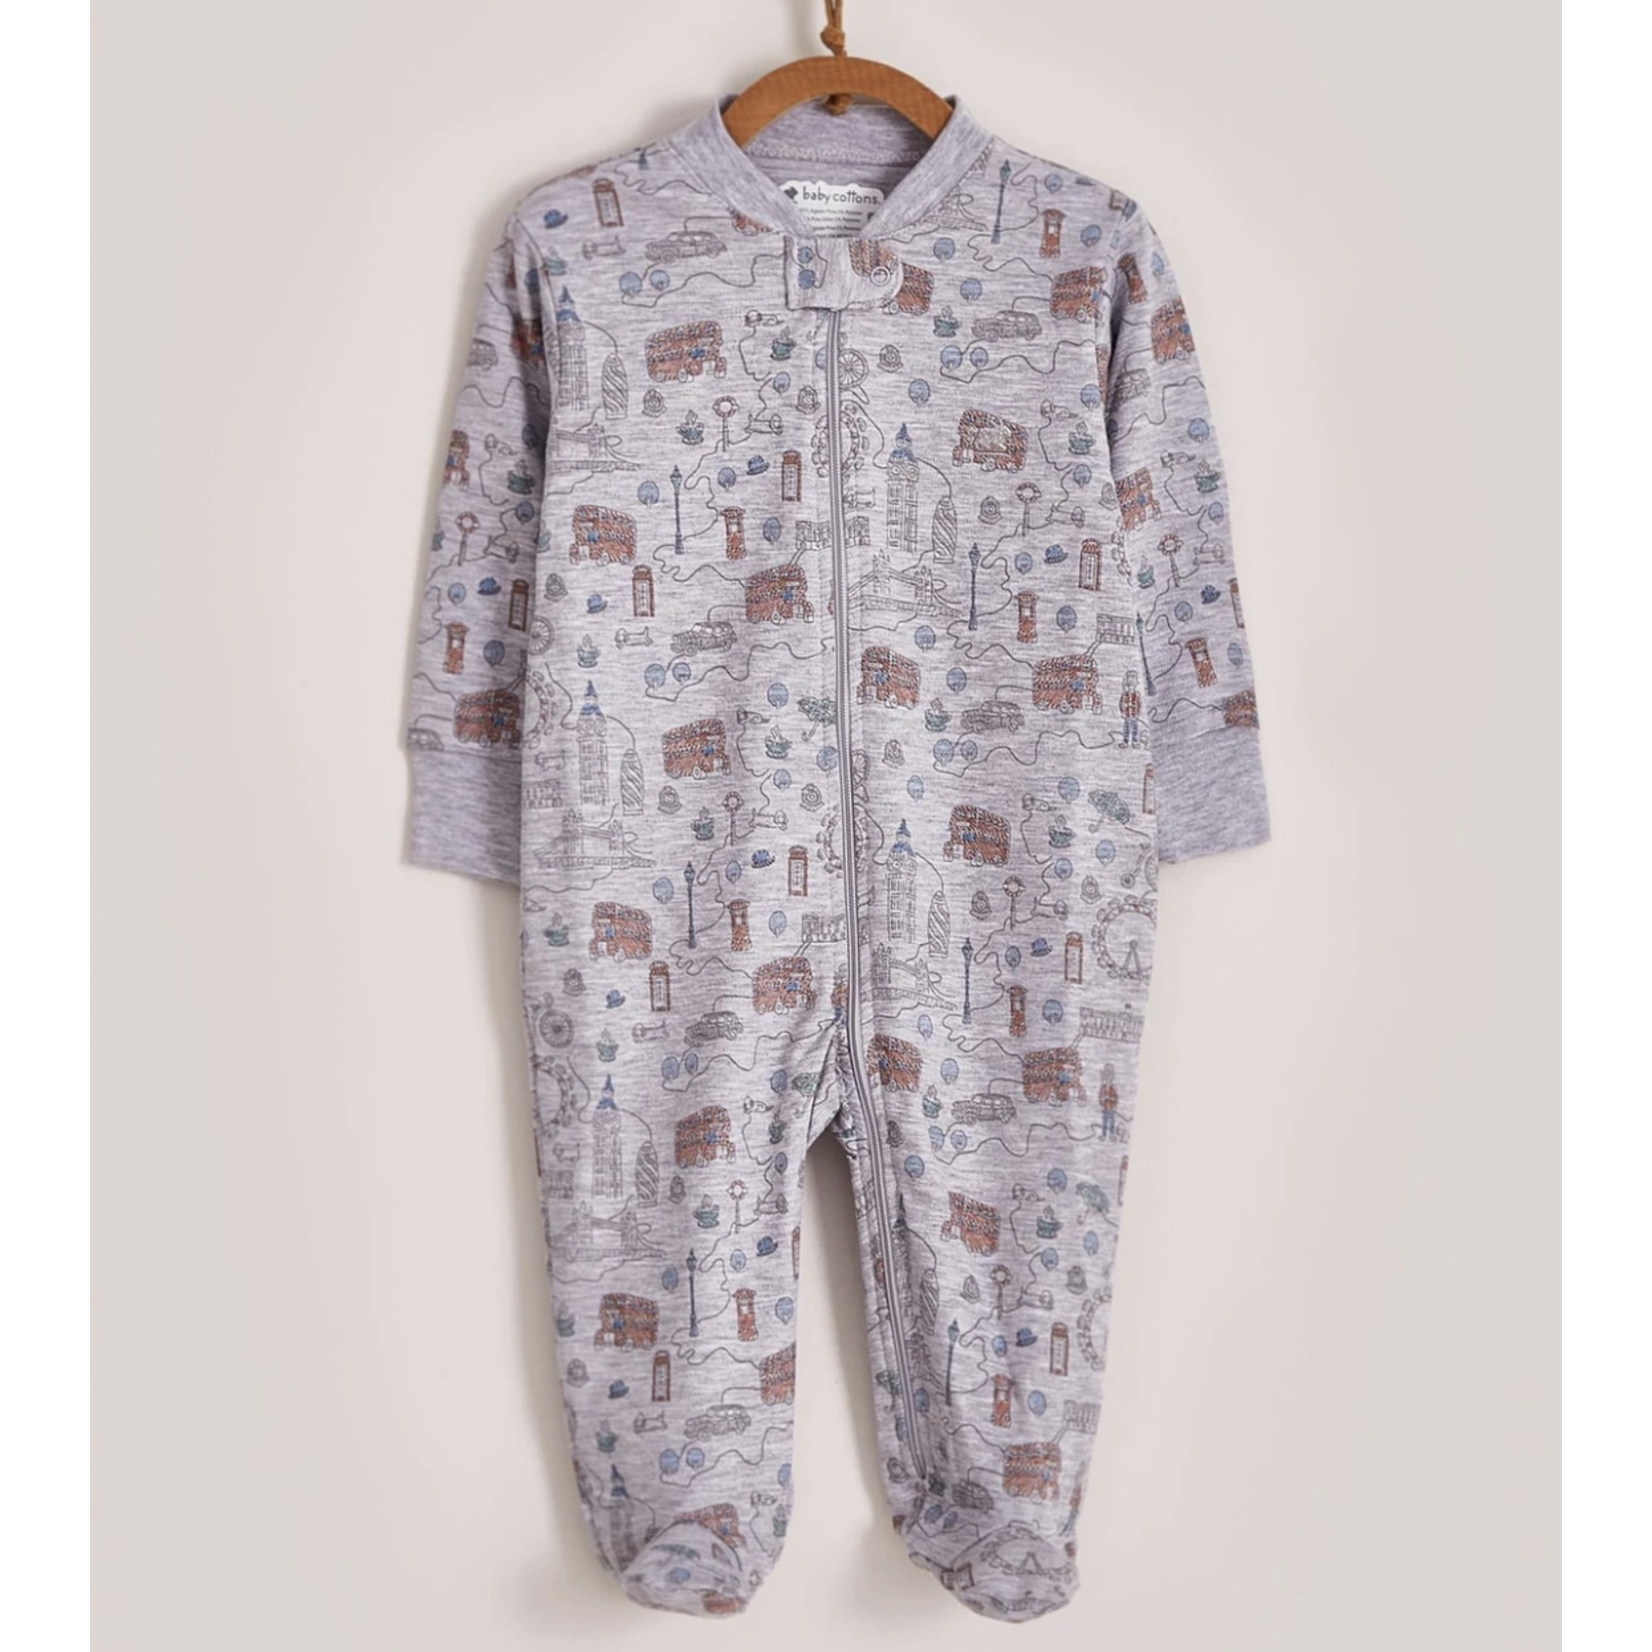 Babycottons London Sights Baby Footed Pajama